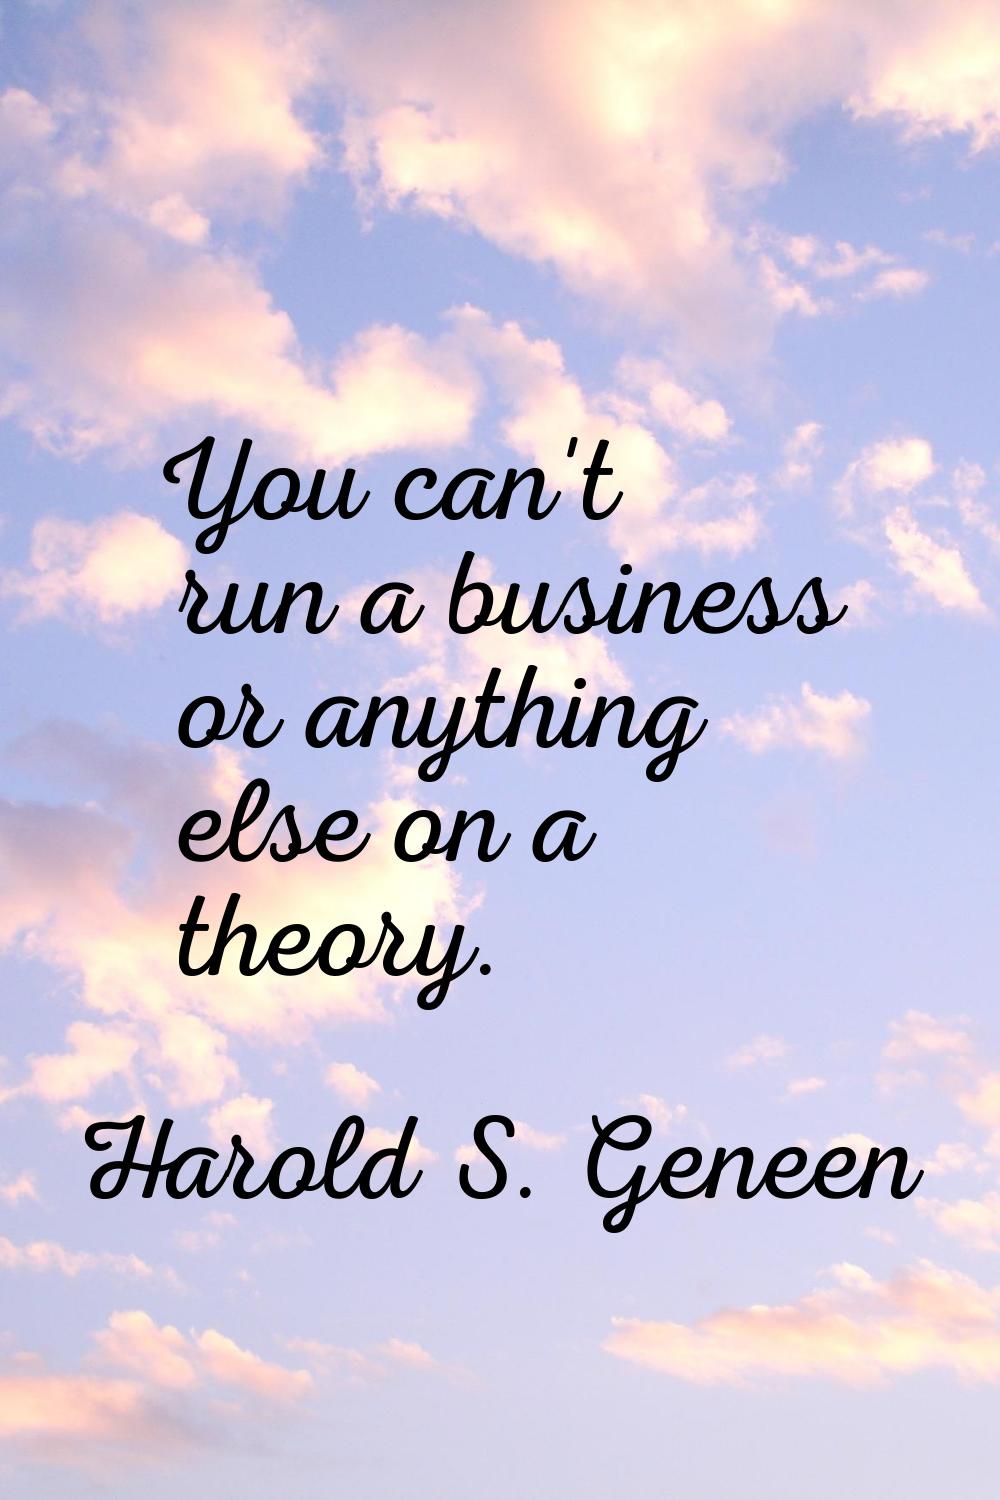 You can't run a business or anything else on a theory.